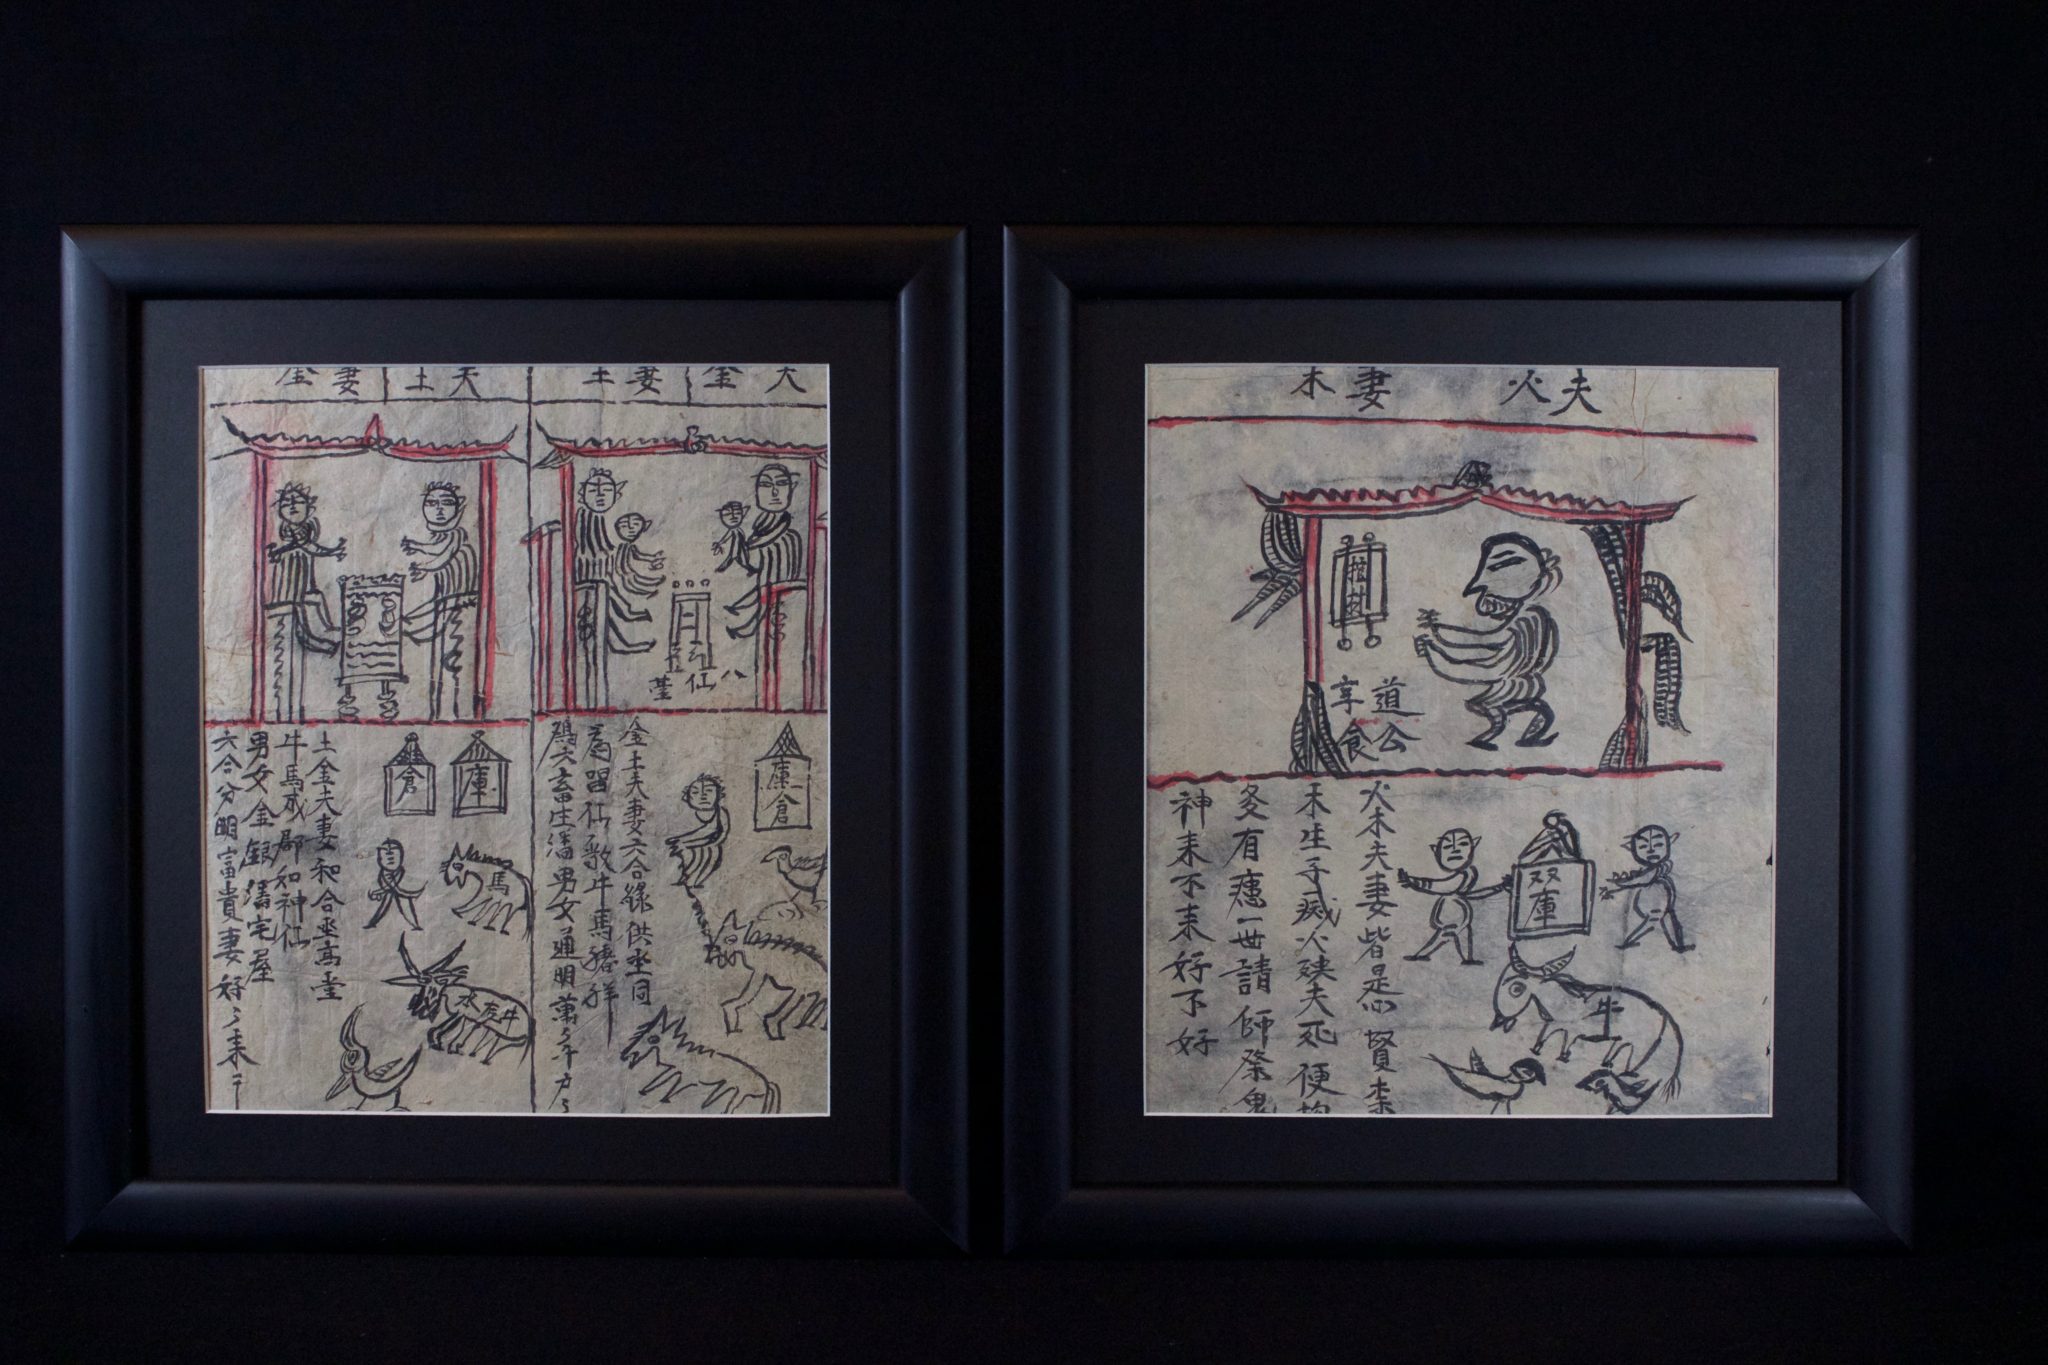 Pages from Shaman's Personal Instructional Book, Cao Bang province, Vietnam, Red Yao people Early 20th c, Ink on handmade mulberry paper (tapa), Written in Nom (Chinese characters adapted to Vietnamese), books are an integral part of a shaman’s repertoire. They range from explanations of various rituals and use of objects, to astrology, history, songs, laws, etiquette, children’s tales, hunting practices, formulas, spells and feng shui. Shaman make their own books to help store their knowledge therefore no two are alike and a high level shaman will have a large library. 12” x 11” x ½” (framed), $120. each